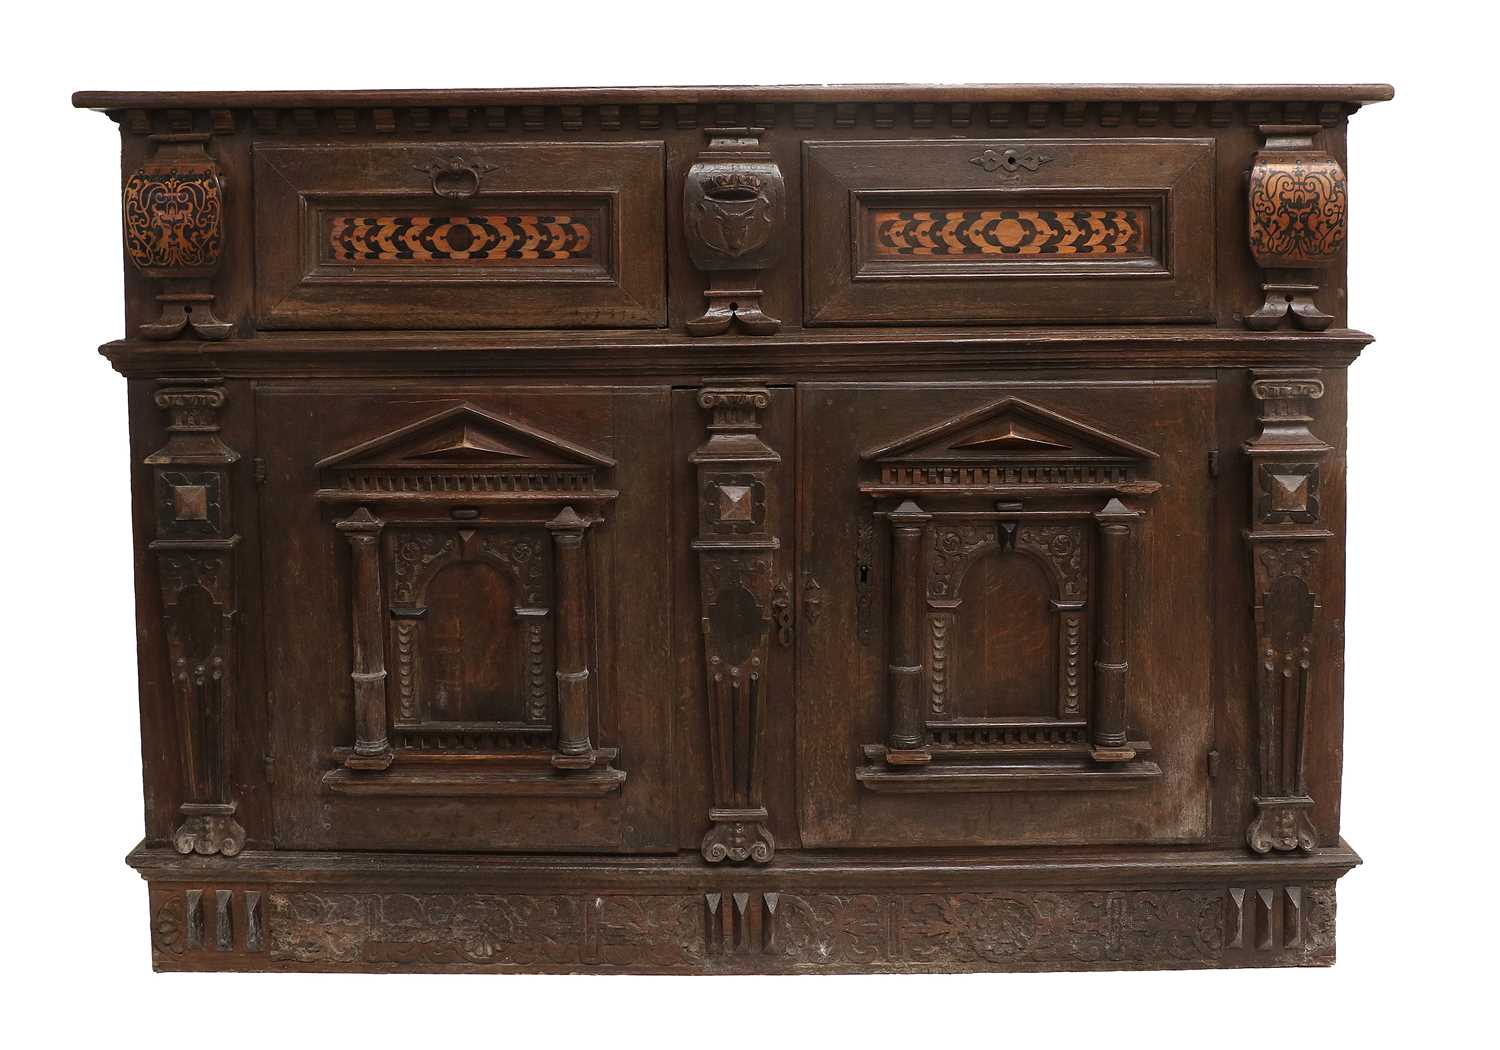 A 17th Century-Style Oak and Marquetry-Decorated Sideboard, the dentil cornice above moulded fall